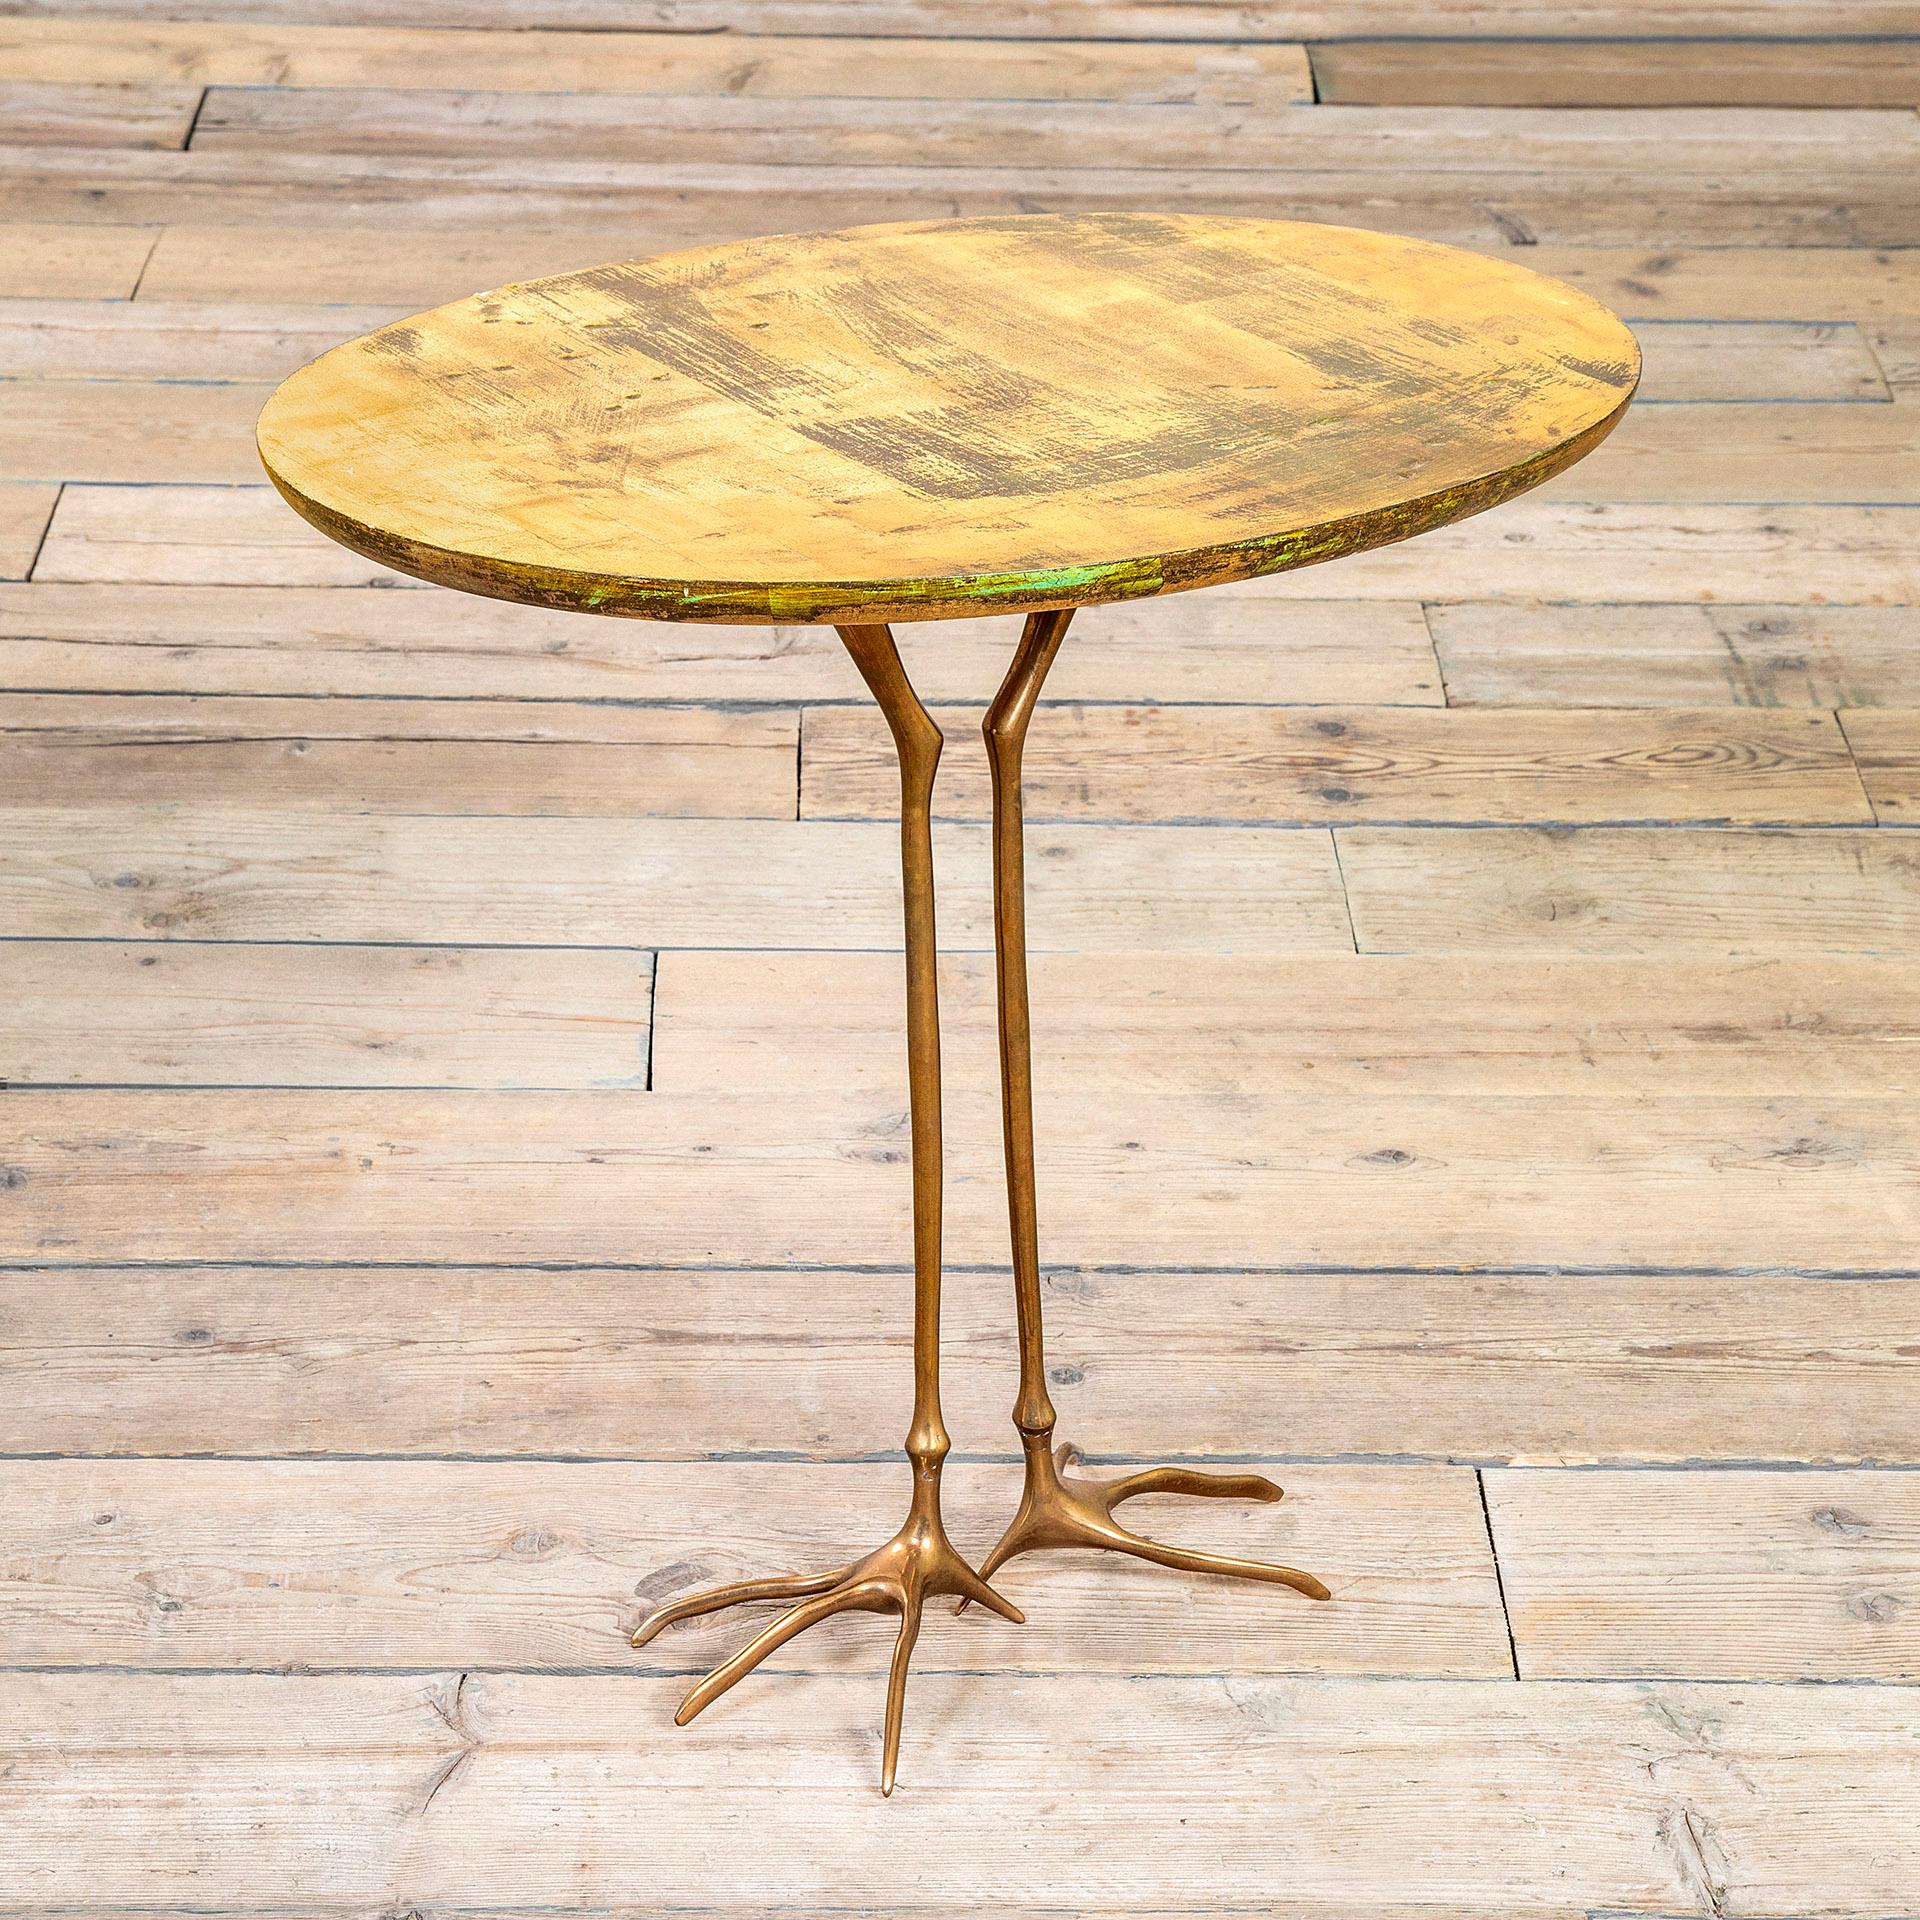 This table is a surrealist piece of furniture made while International Style was popular. Meret Oppenheim was a German-born Swiss artist and designer best known for her teacup lined with fur, now in the collection of the Museum of Modern Art.